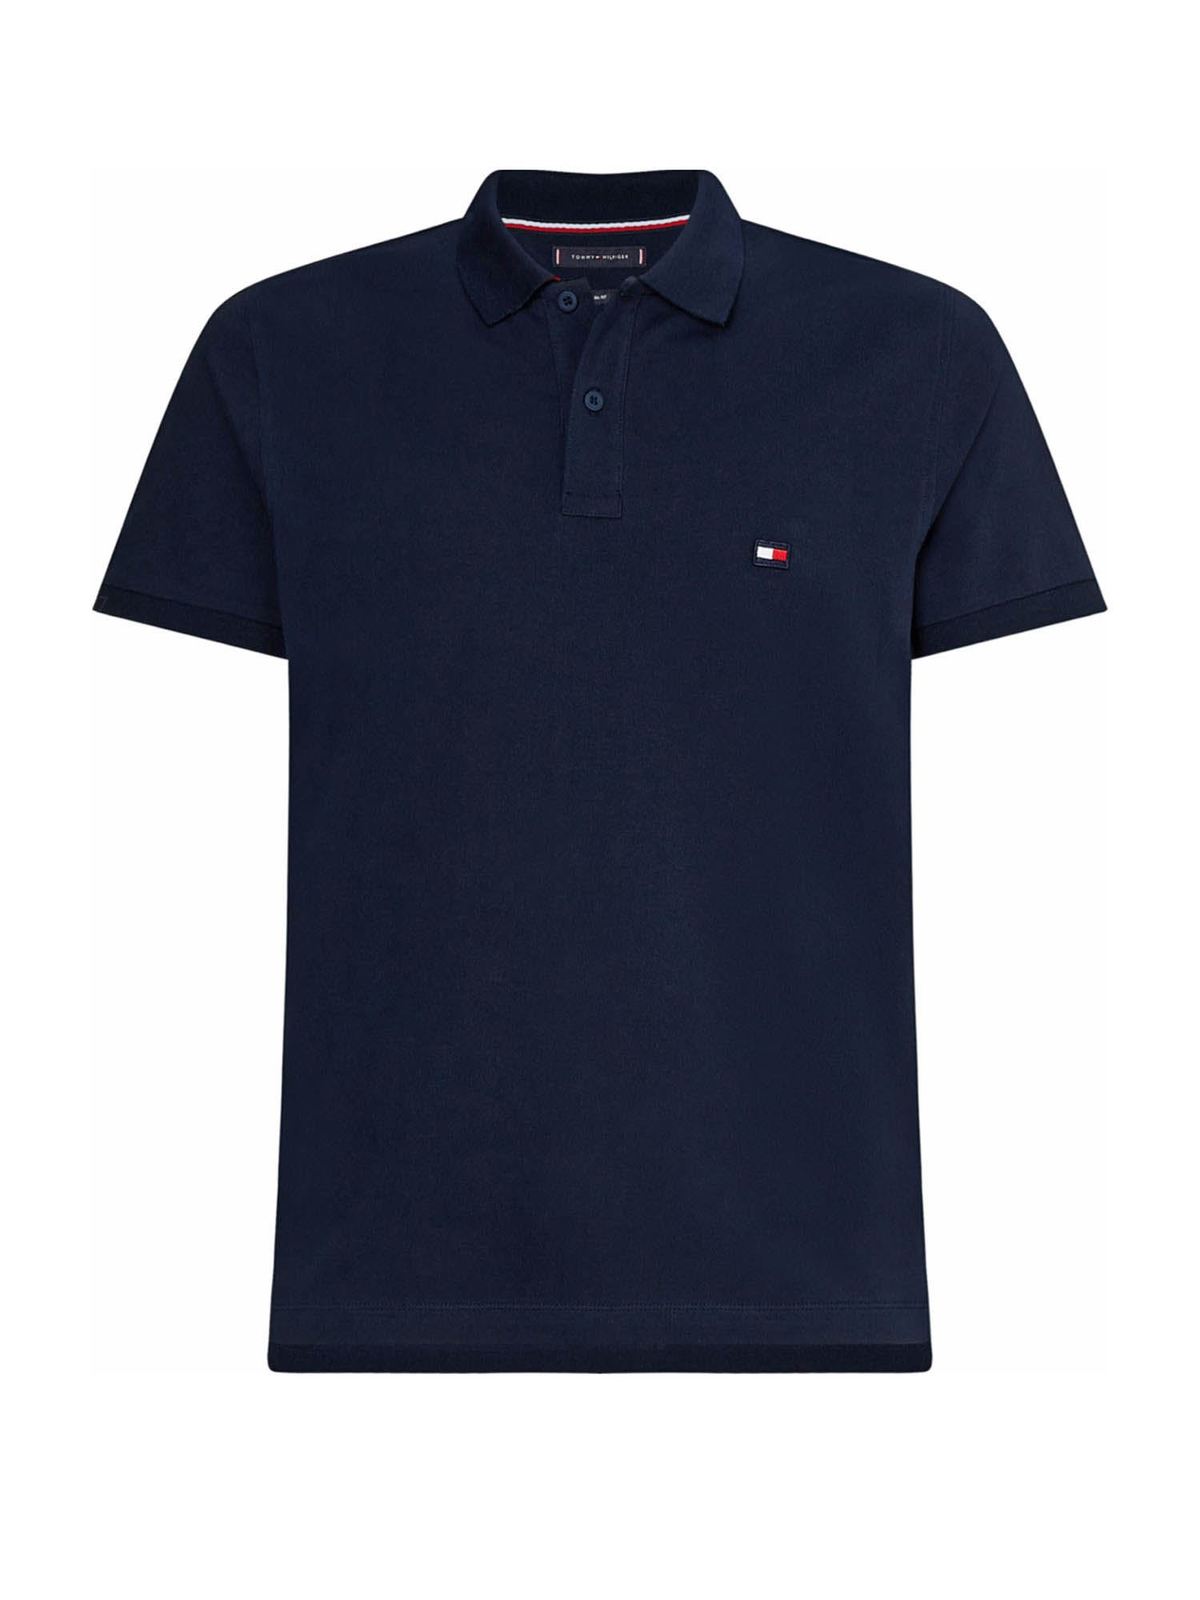 TOMMY HILFIGER SLIM FIT POLO SHIRT IN BLUE